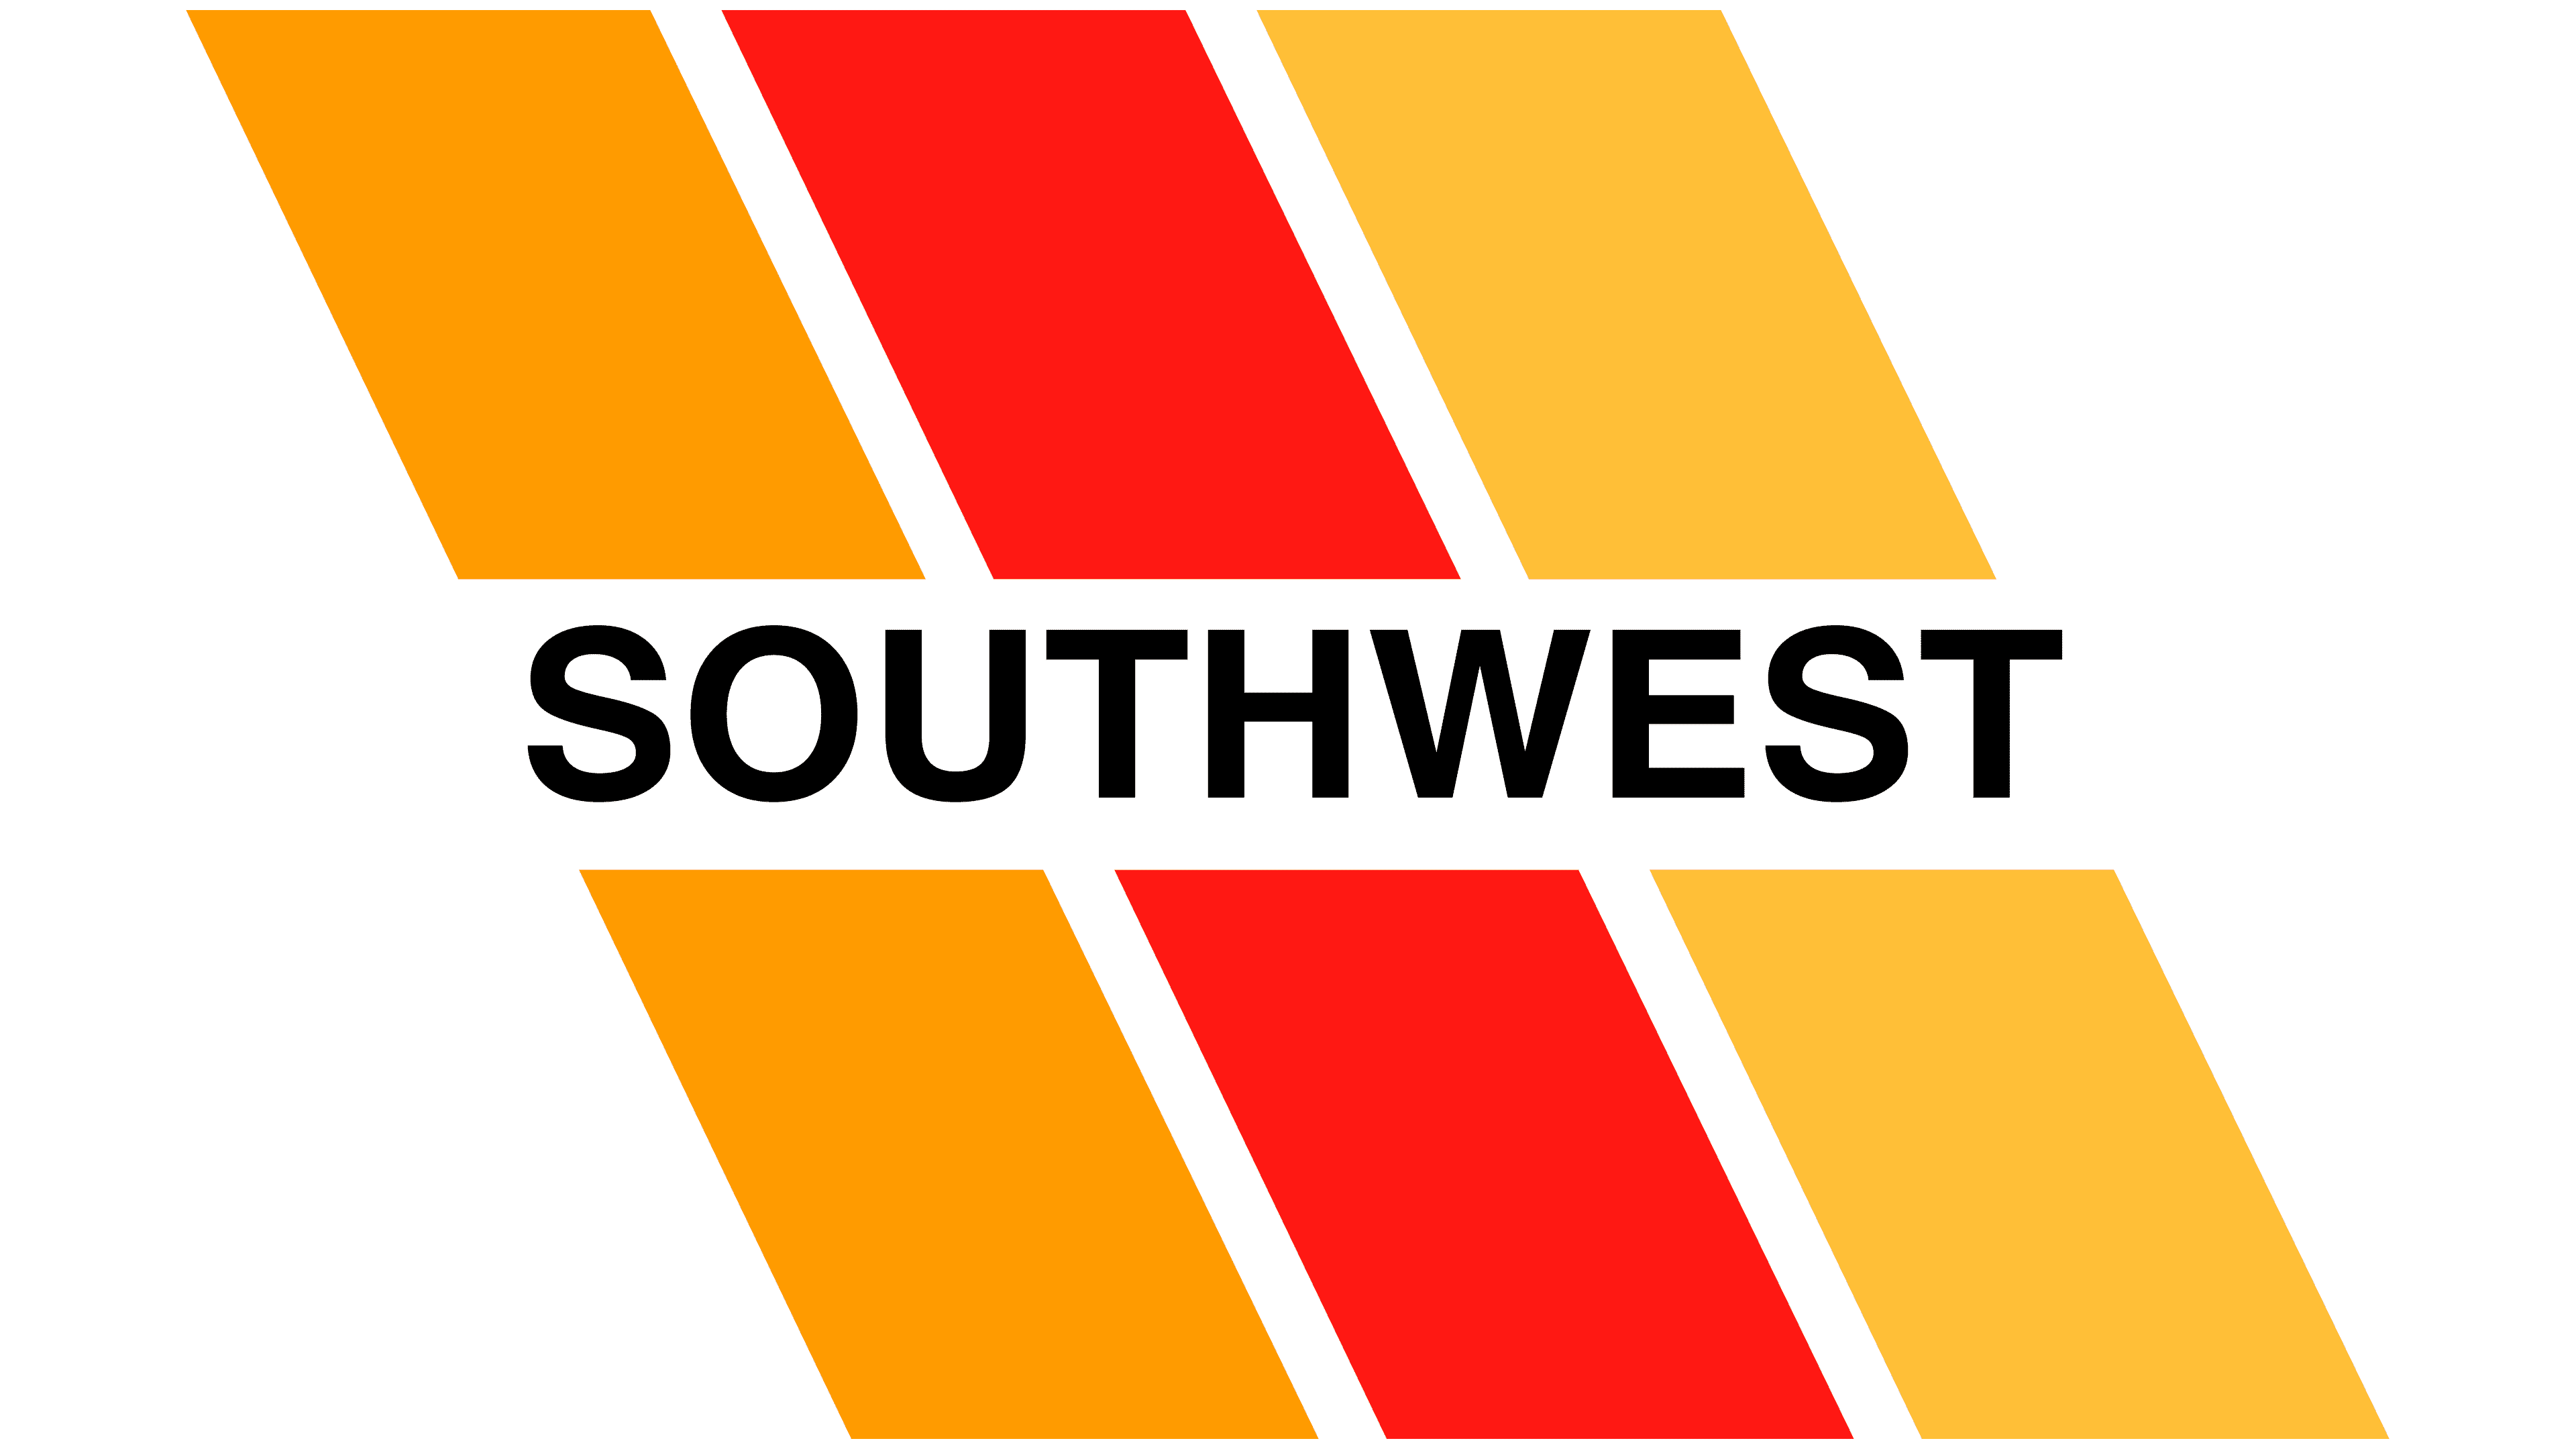 southwest airlines points